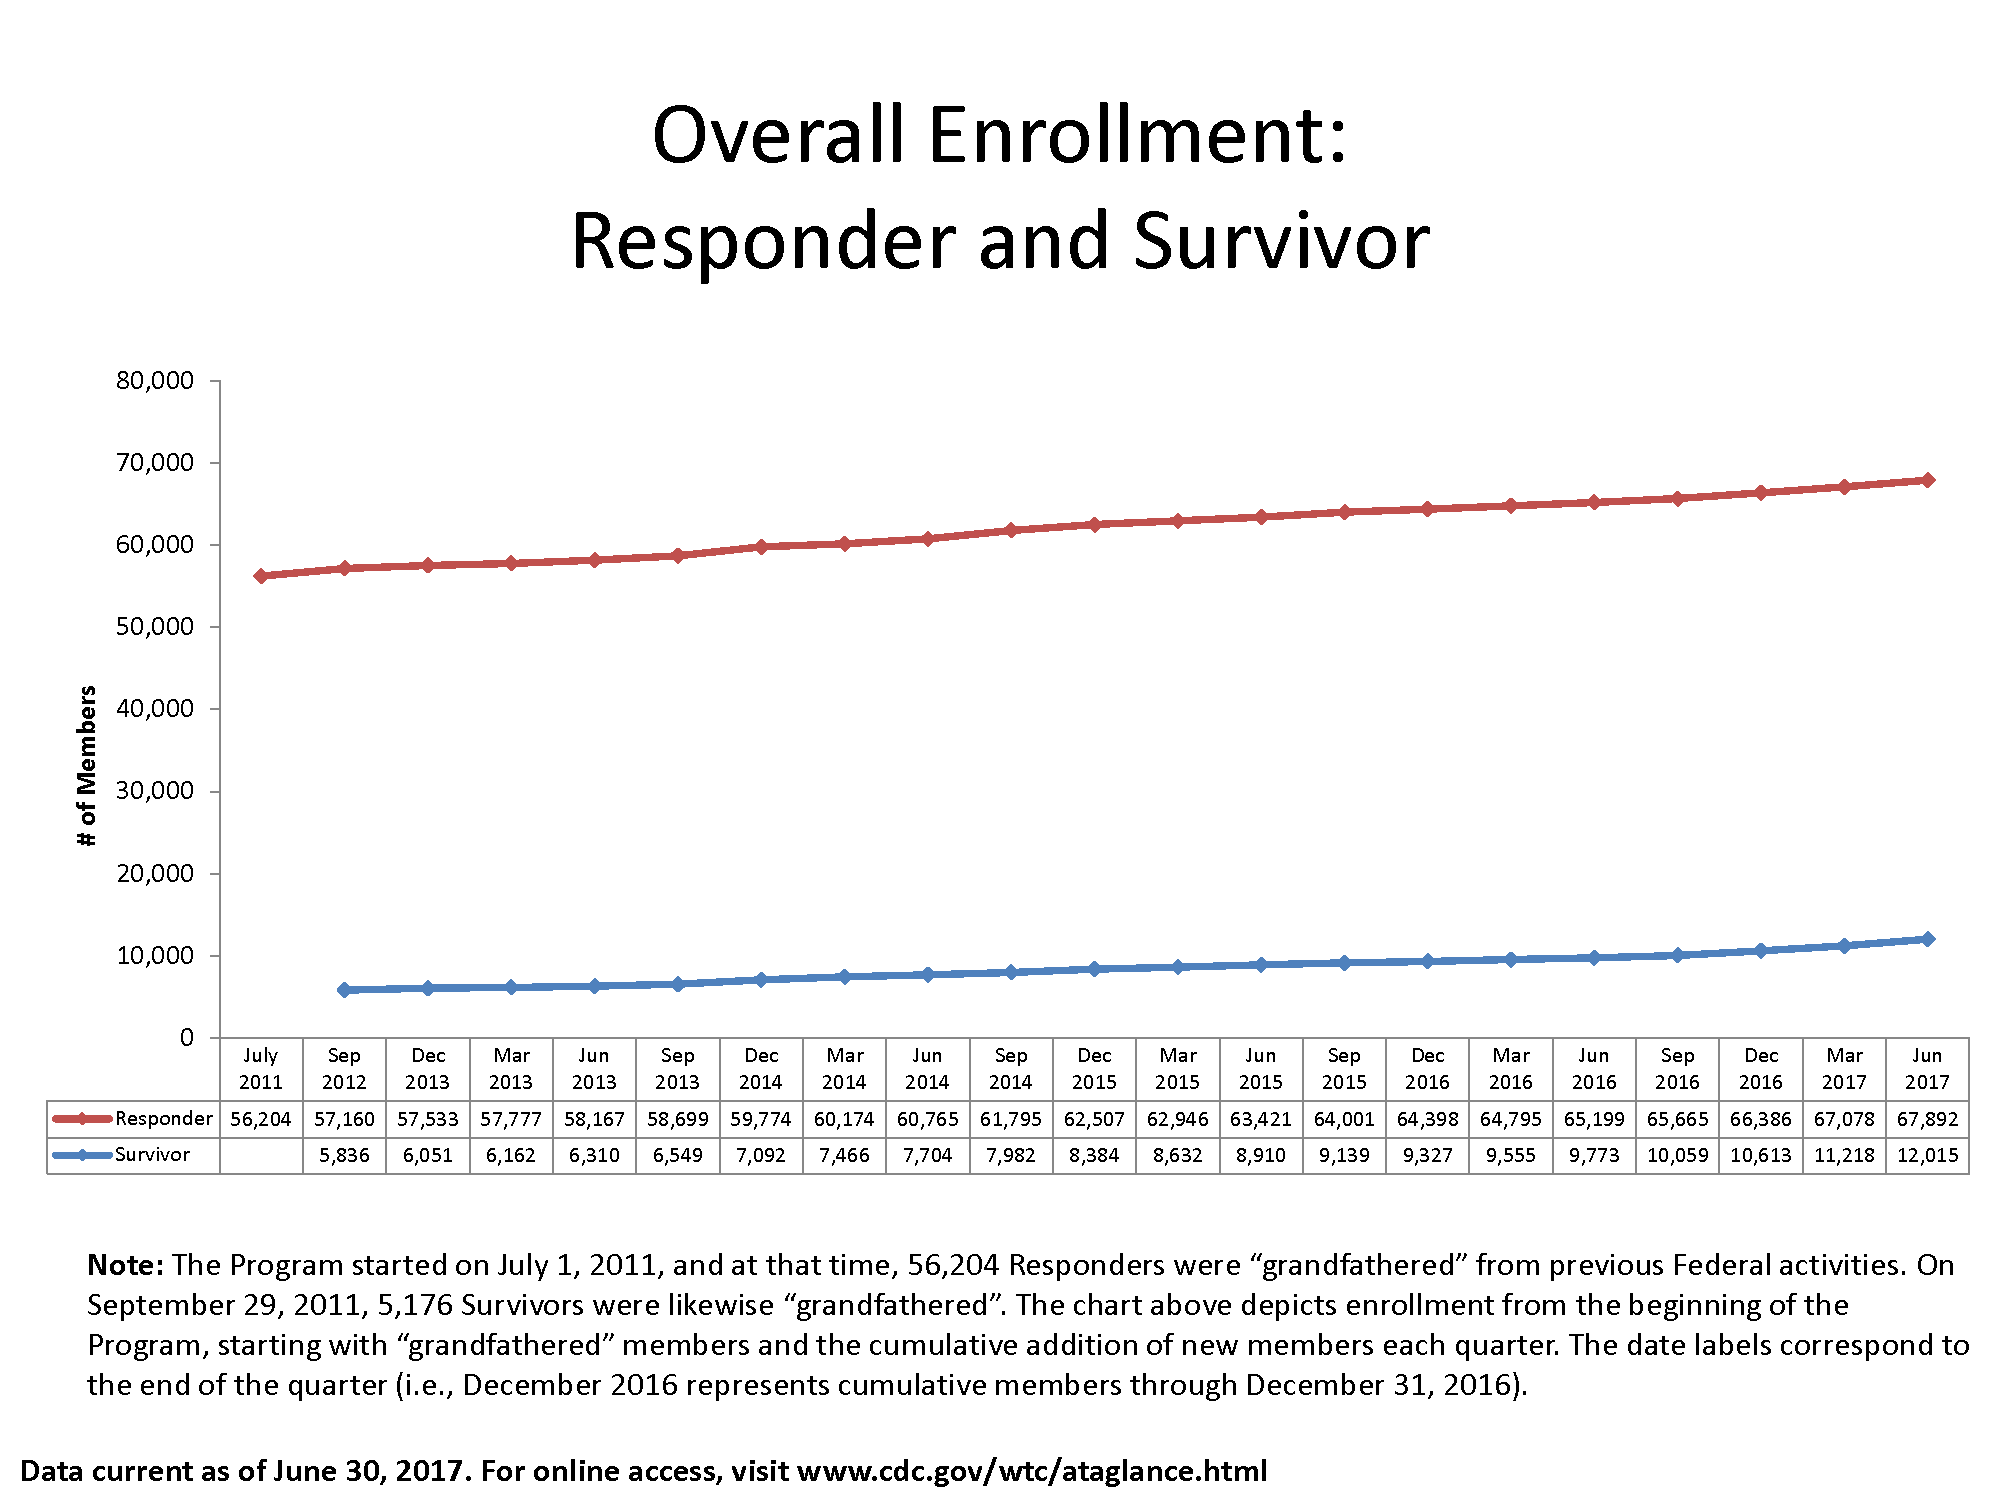 Line graph of data in table below showing enrollment in the World Trade Center Health Program by Responder and Survivor from July 2011 through June 2017.